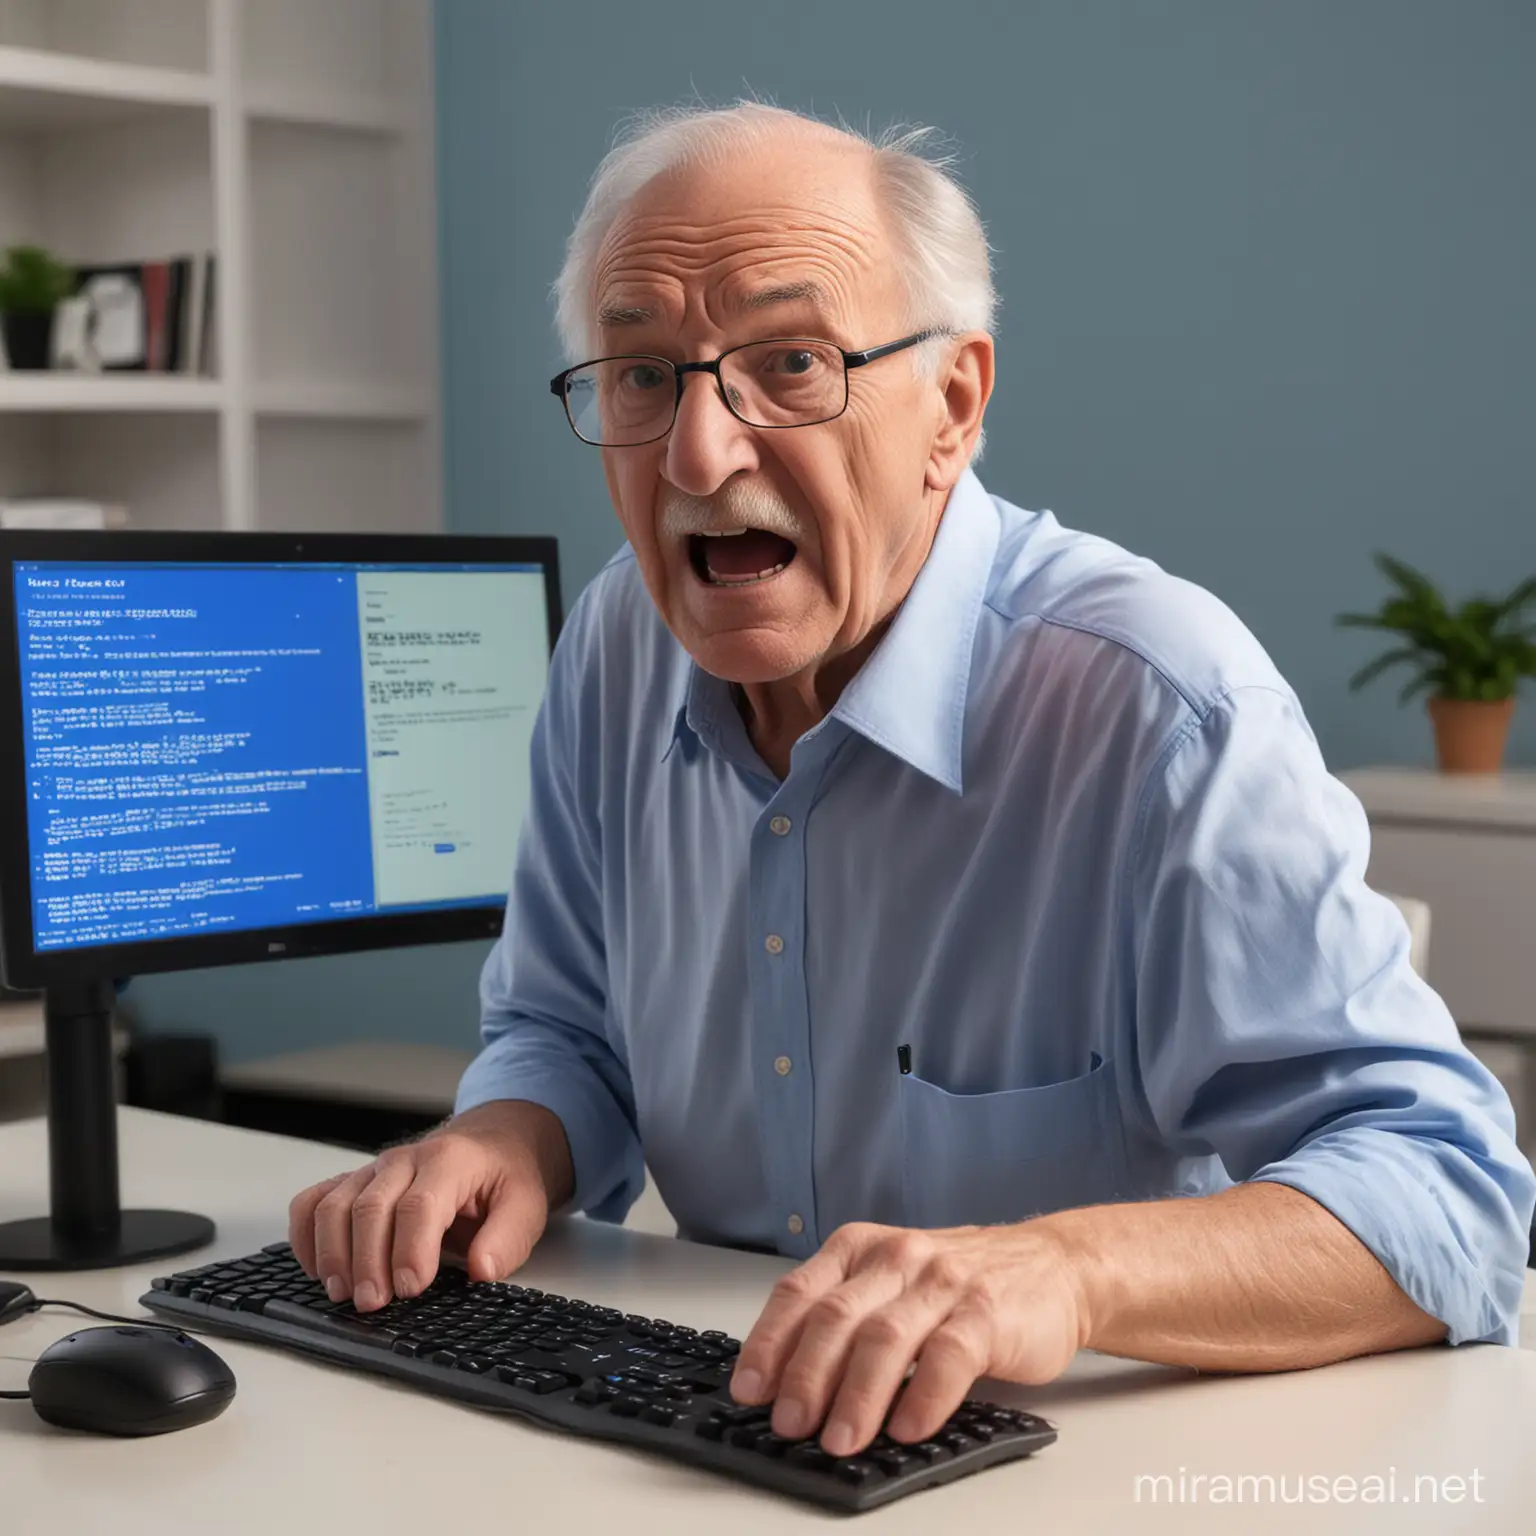 Grandfather Reacts to PC Blue Screen of Death During Update